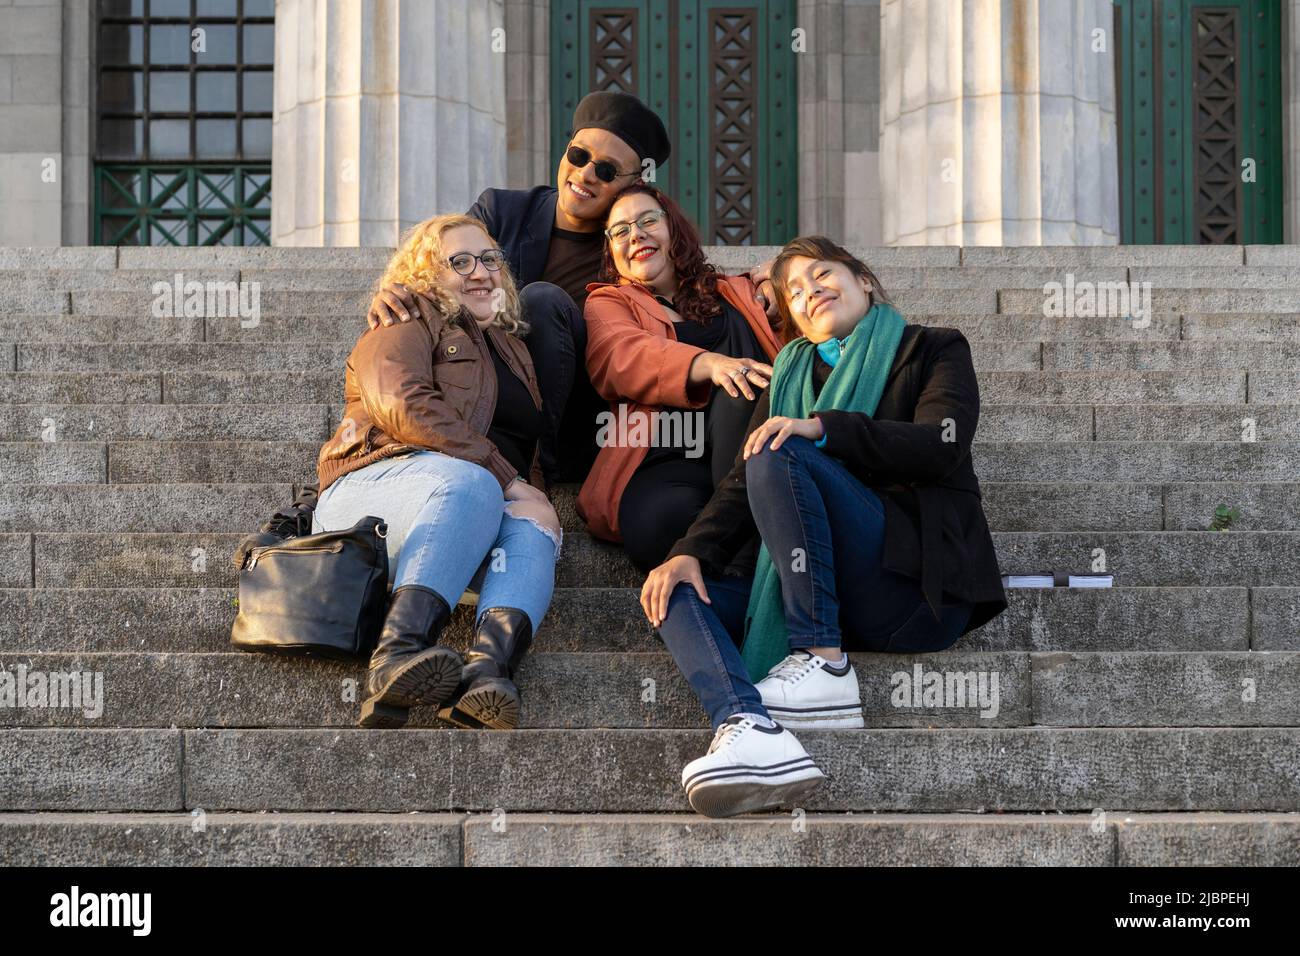 Multi ethnic group of friends sitting on some stairs having a good time chatting and laughing Stock Photo